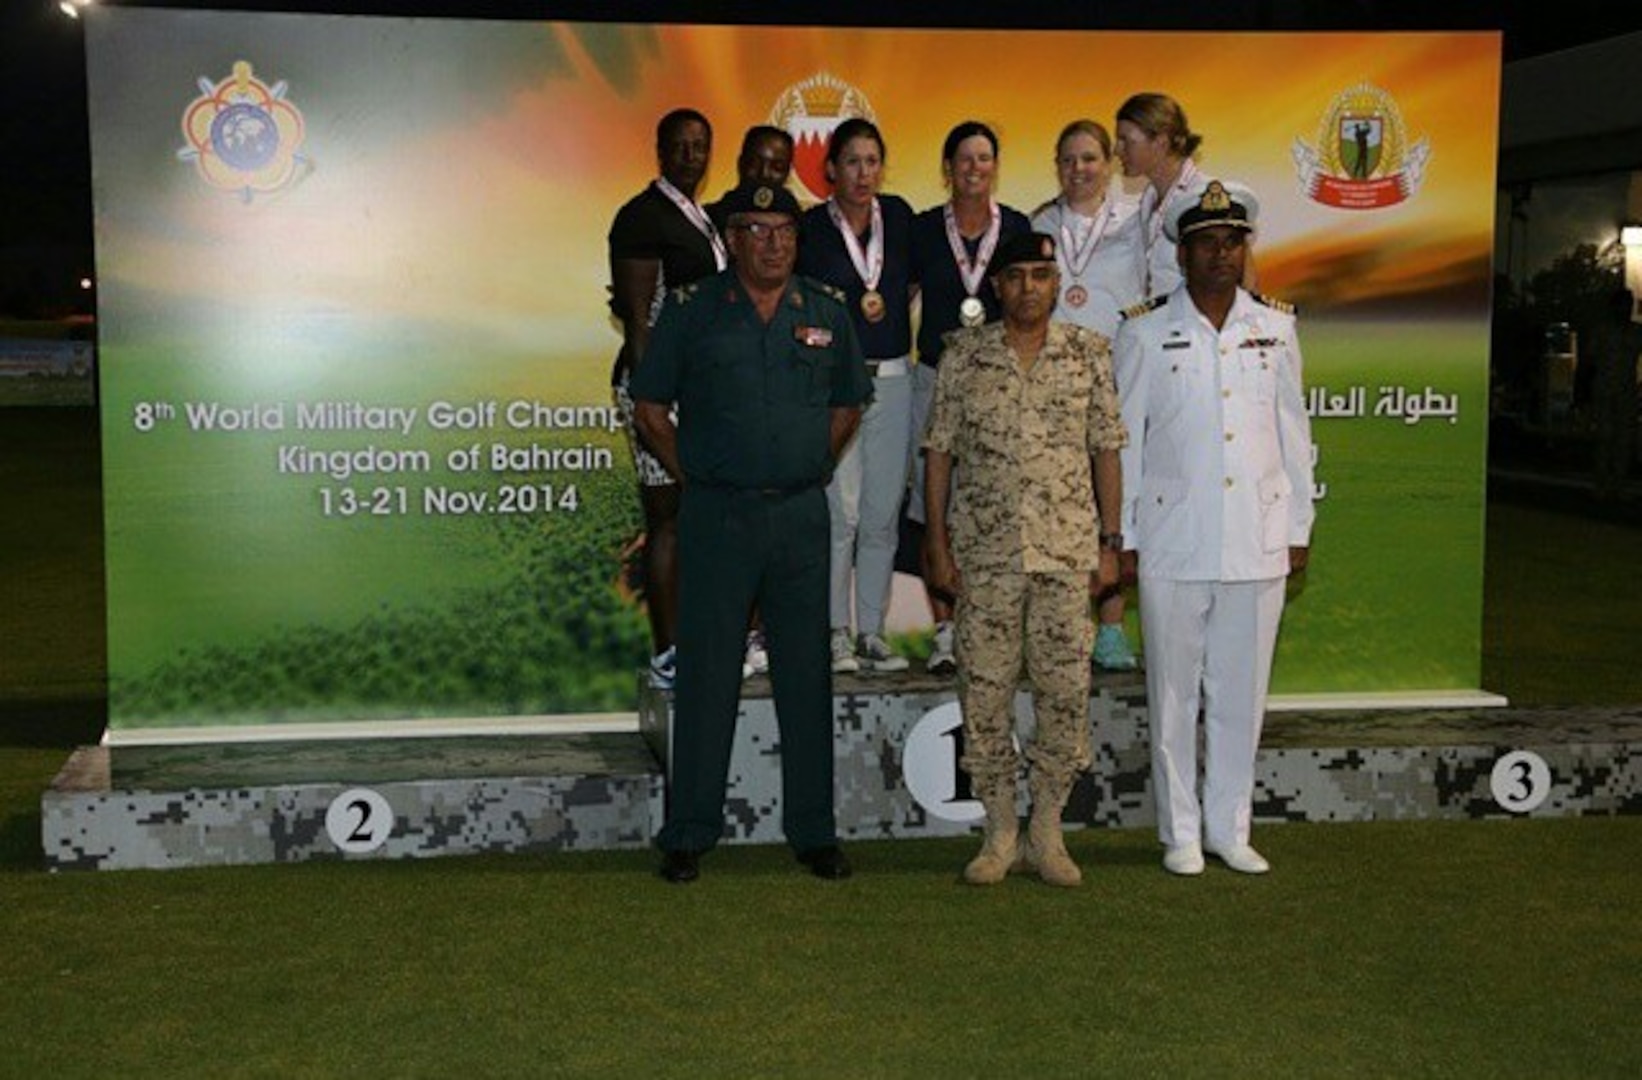 The US Armed Forces Women's Team win their seventh CISM World Military Golf Championship gold medal.  Air Force Maj Linda Jeffery and Navy Lieut. Nicole Johnson dominated the field on their way to gold. Jeffery and Johnson were also teammates during the 2012 CISM Championship where they earned gold as a tandem.  The 8th CISM World Military Golf Championship held in Bahrain 13-21 November 2014.